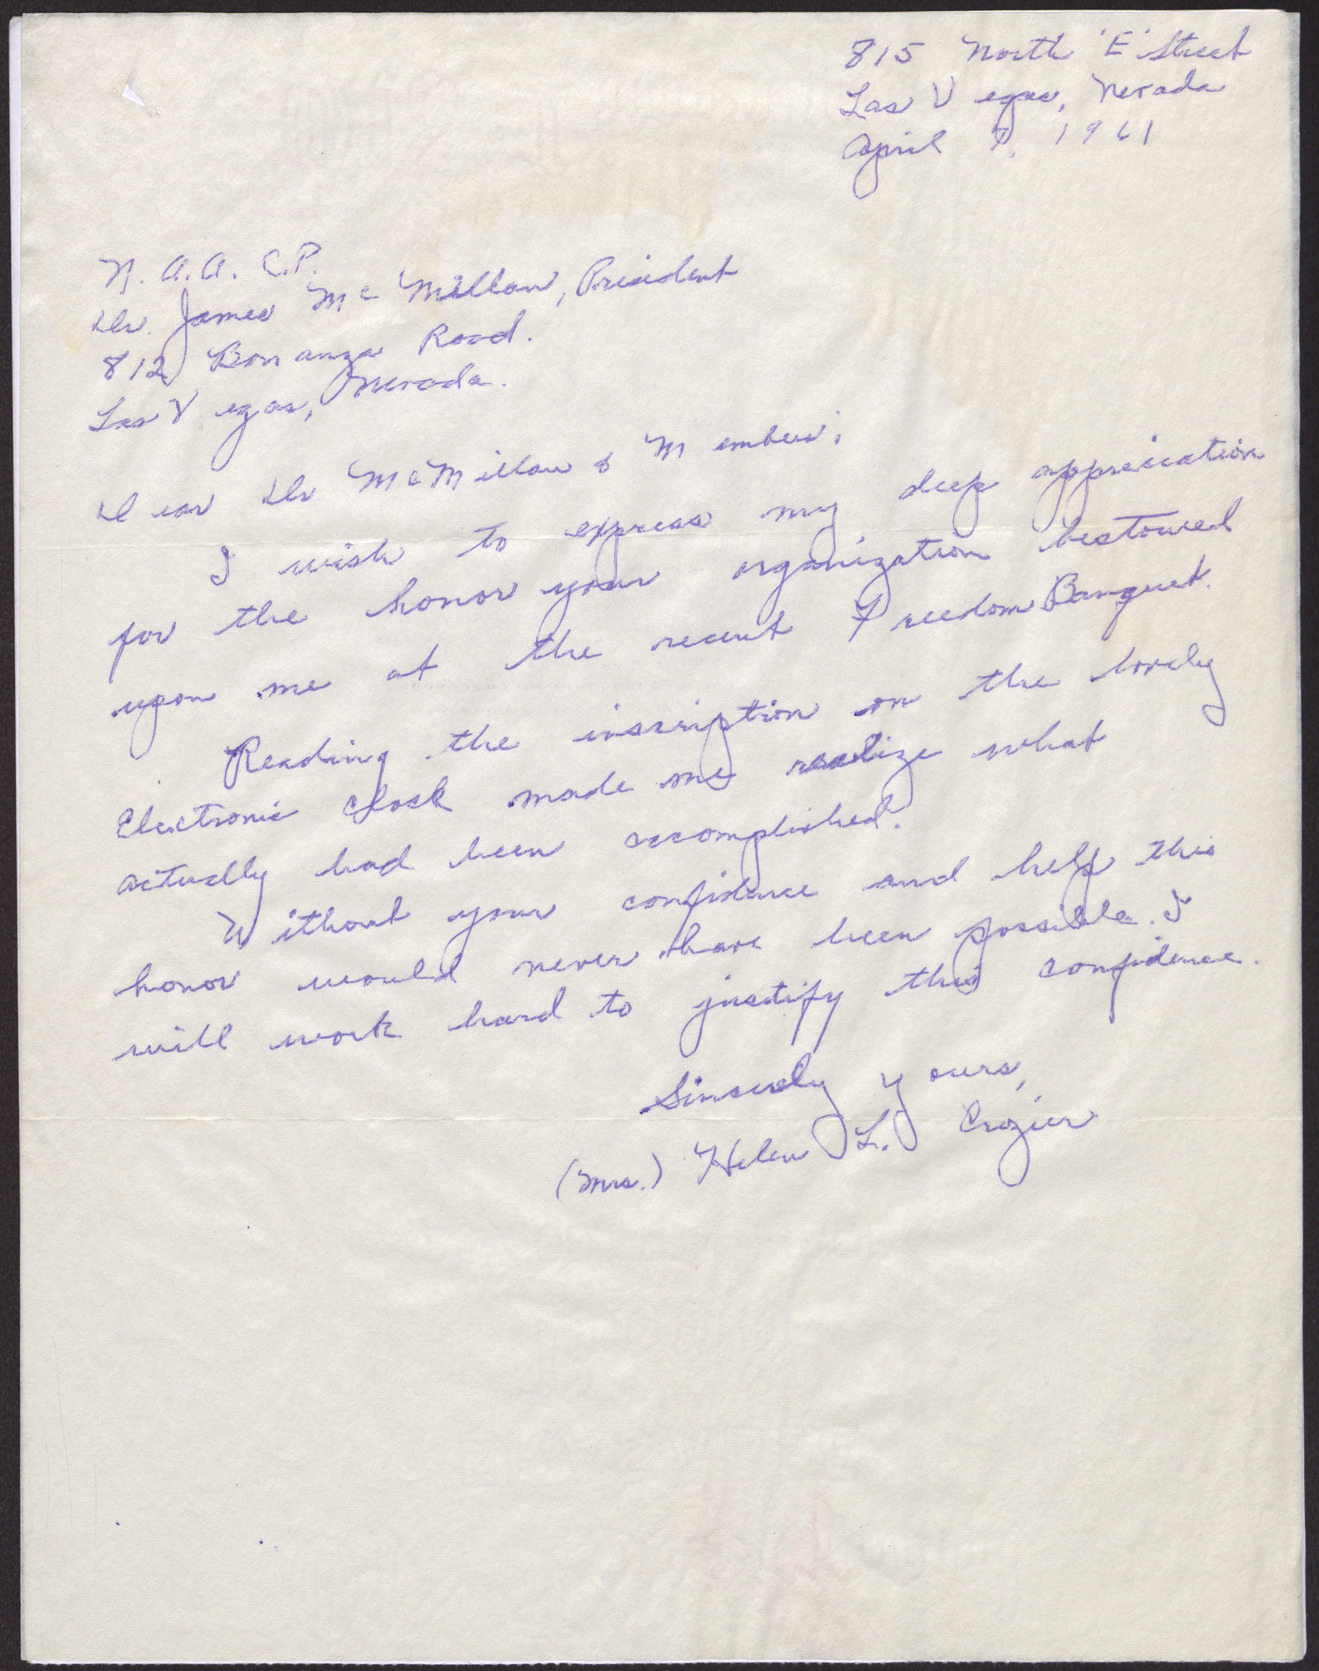 Handwritten letter to Dr. James McMillan from Helen L. Crozier, April 7, 1961